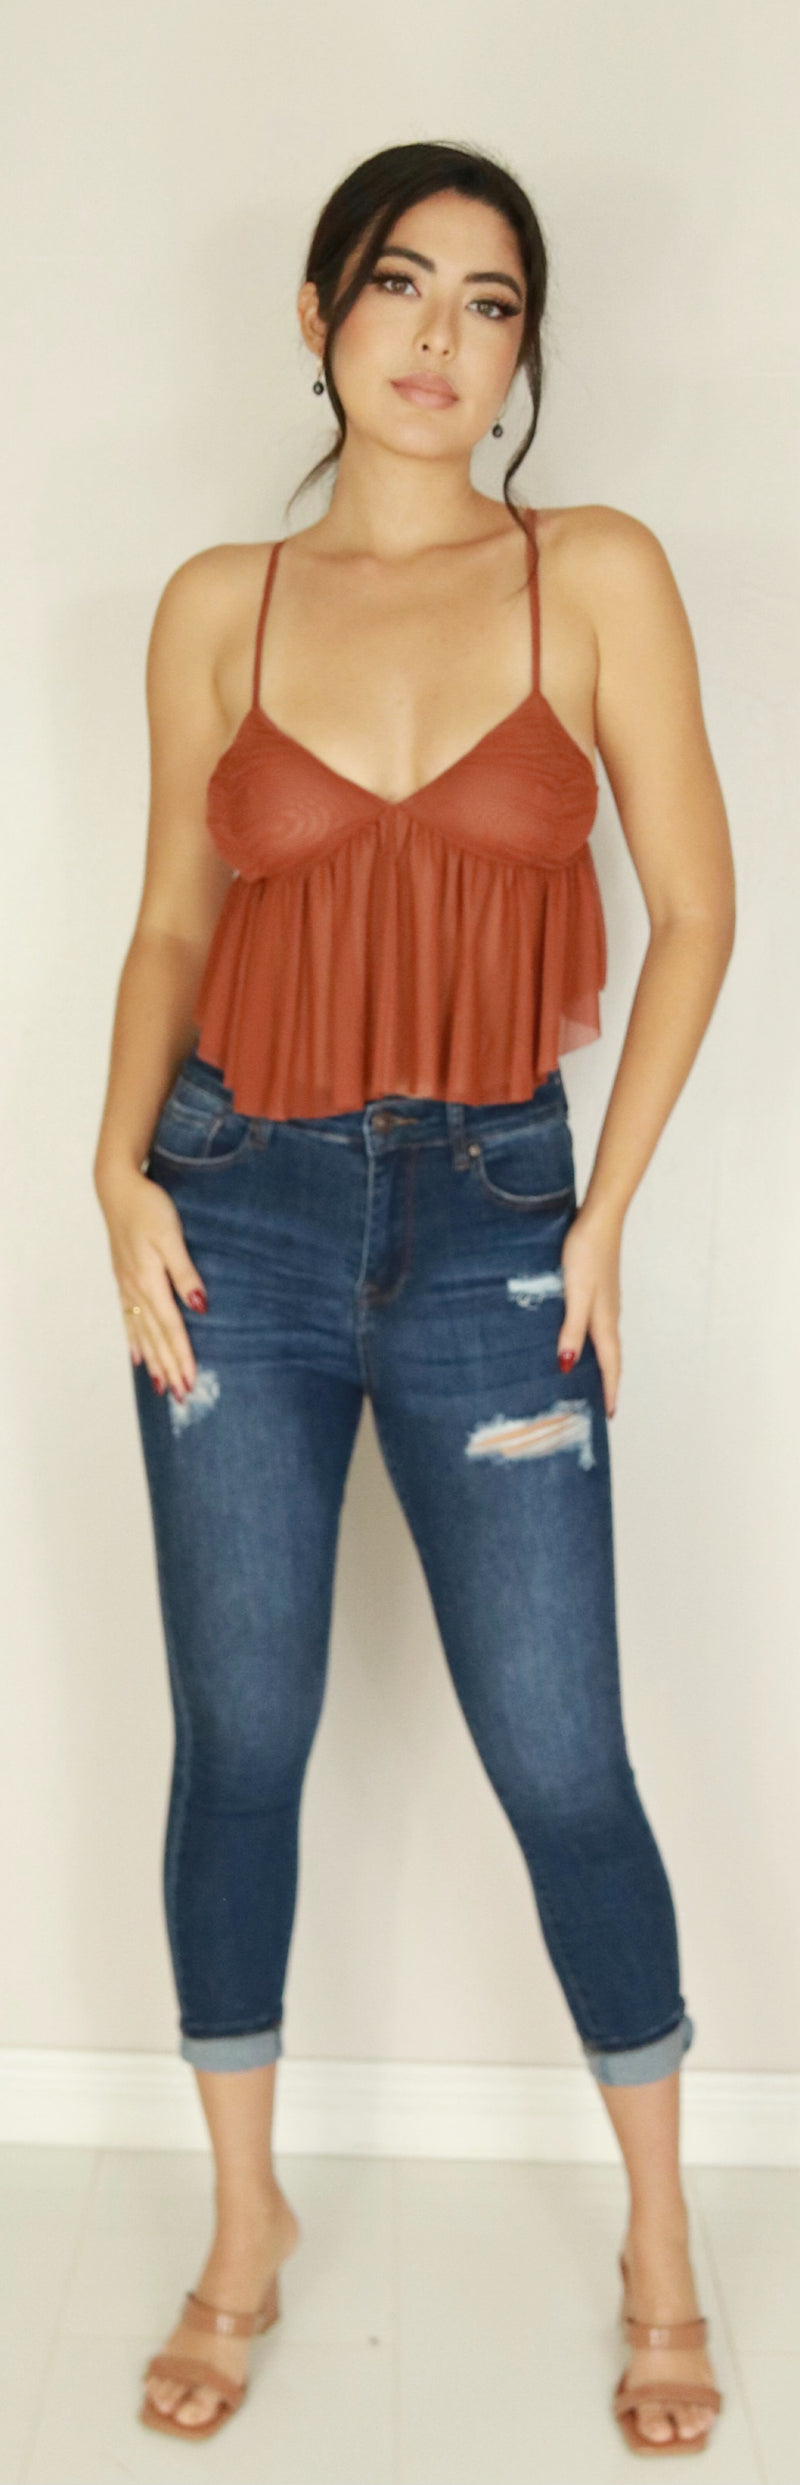 Jeans Warehouse Hawaii - S/L SOLID WOVEN TOPS - SHEER PEPLUM TOP | By MIOU MUSE